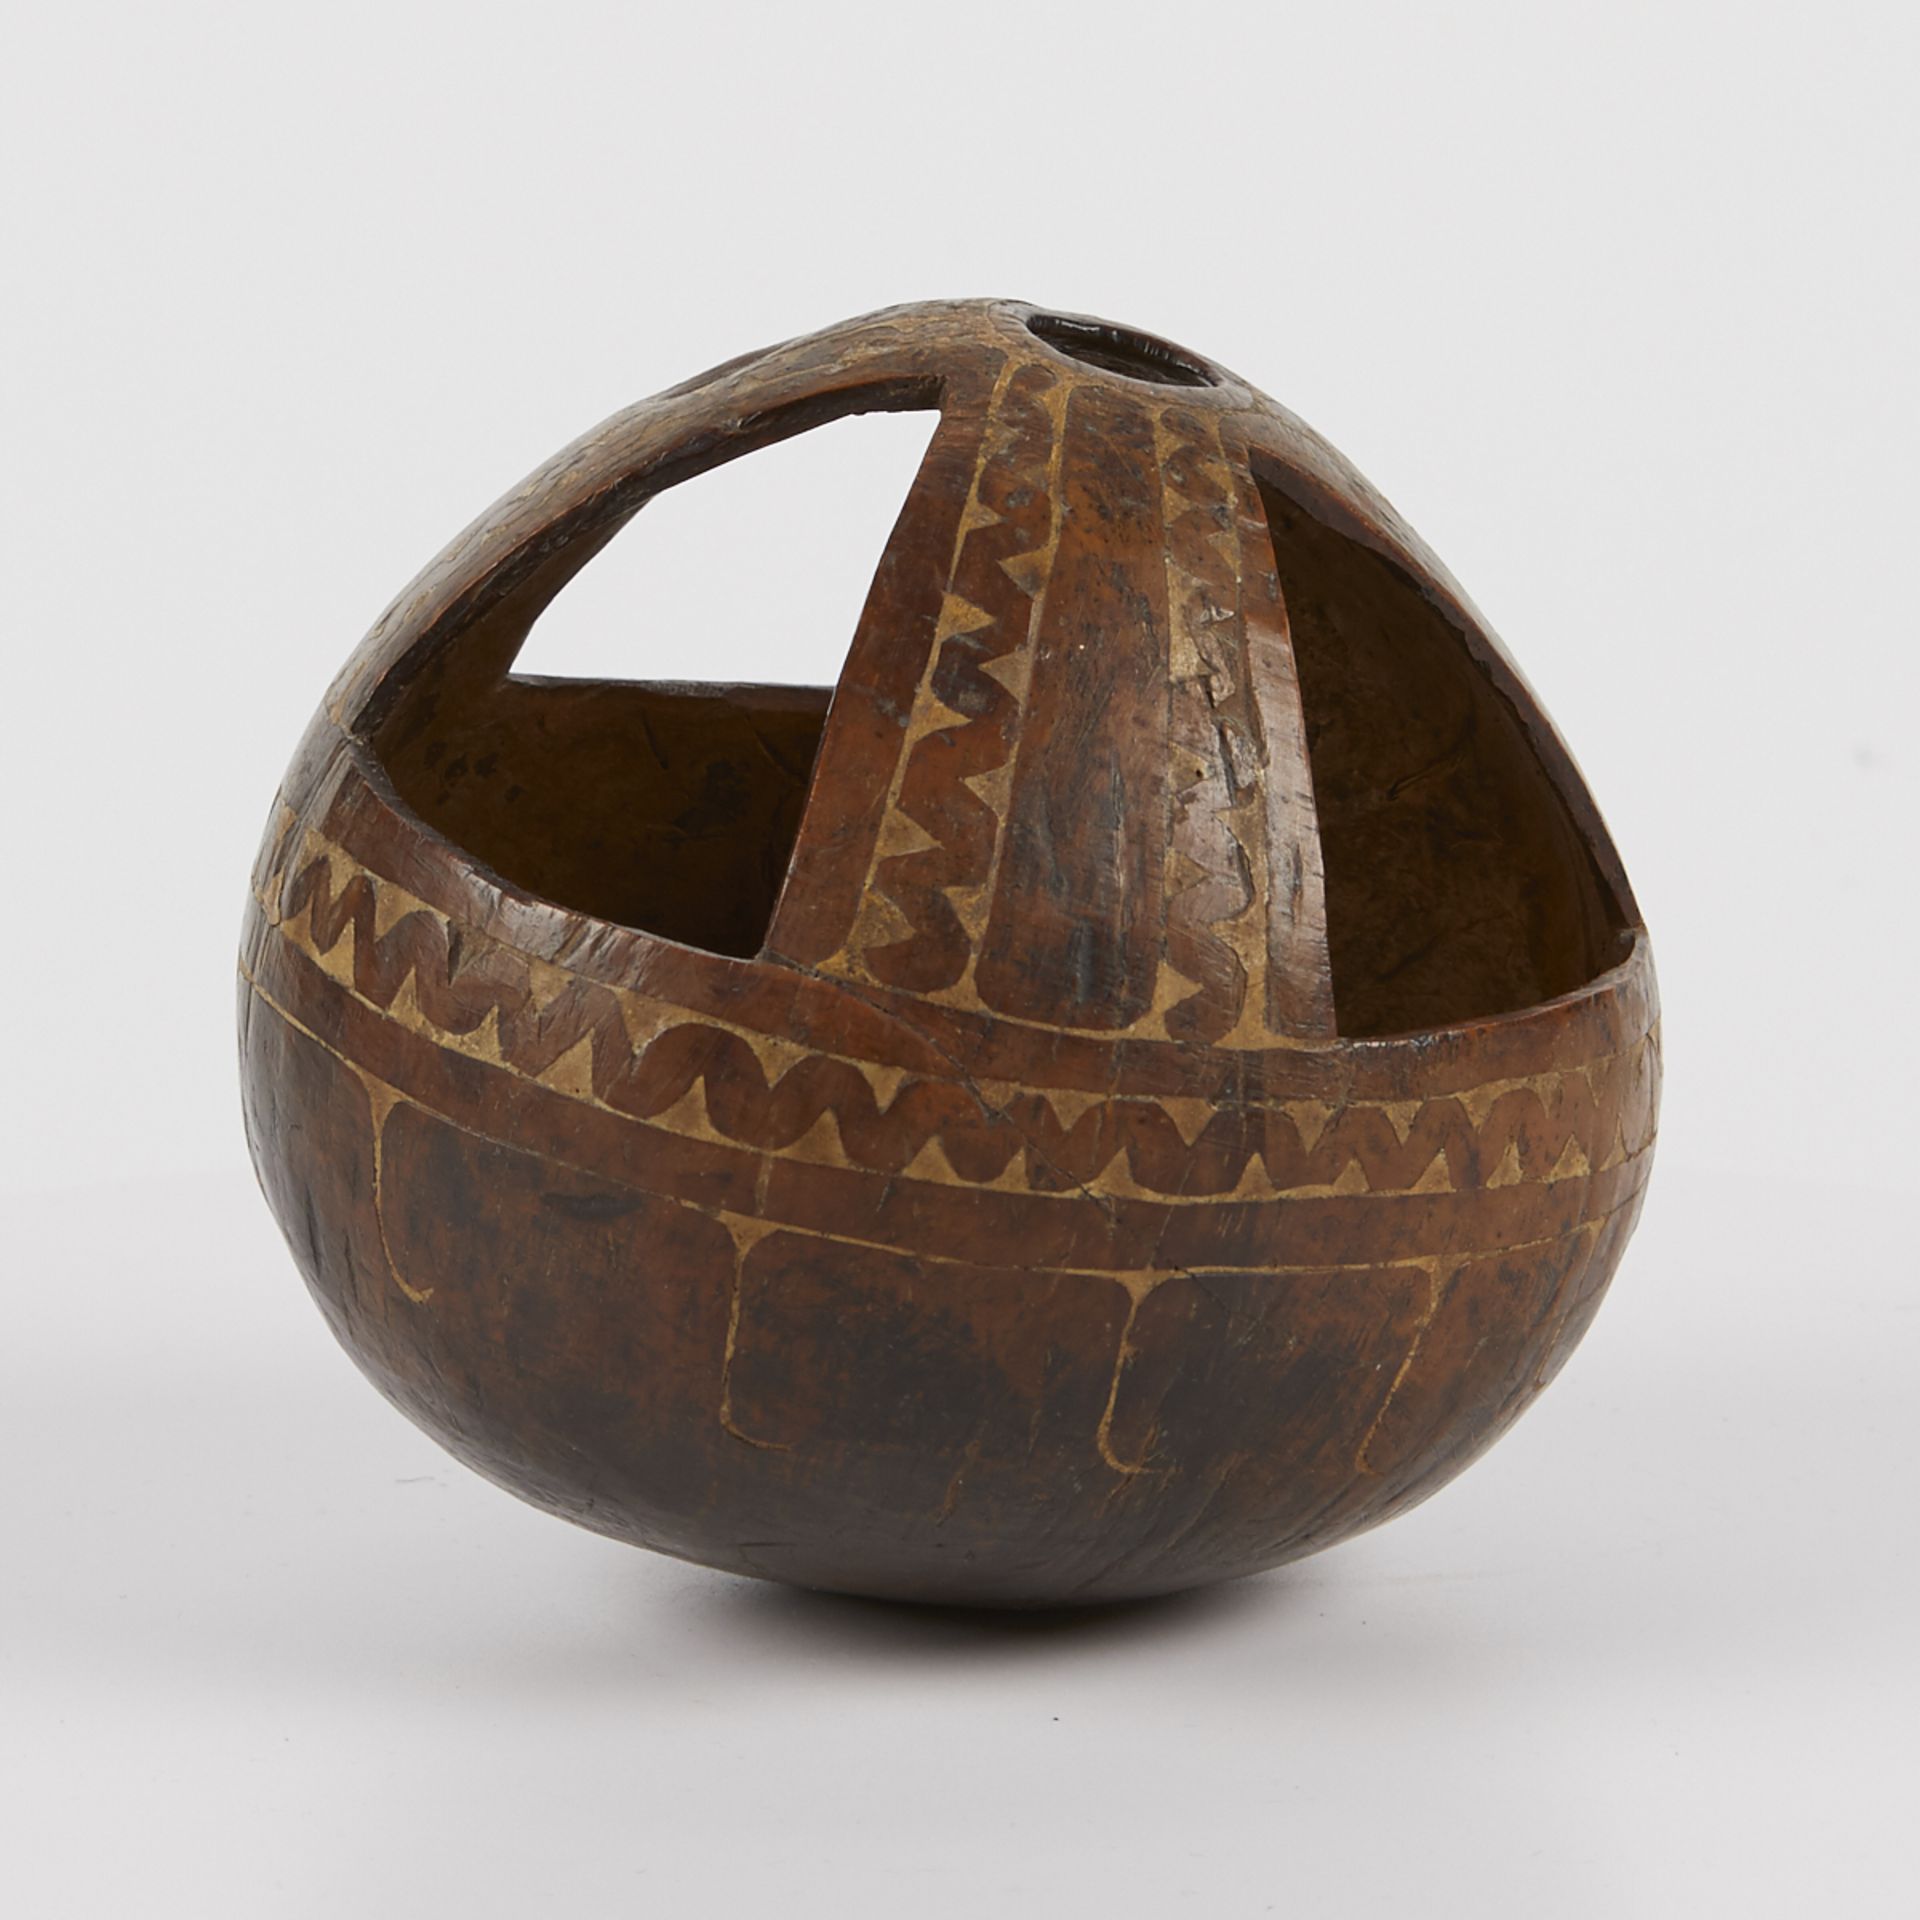 Early New Guinea Carved Coconut Vessel - Image 3 of 7